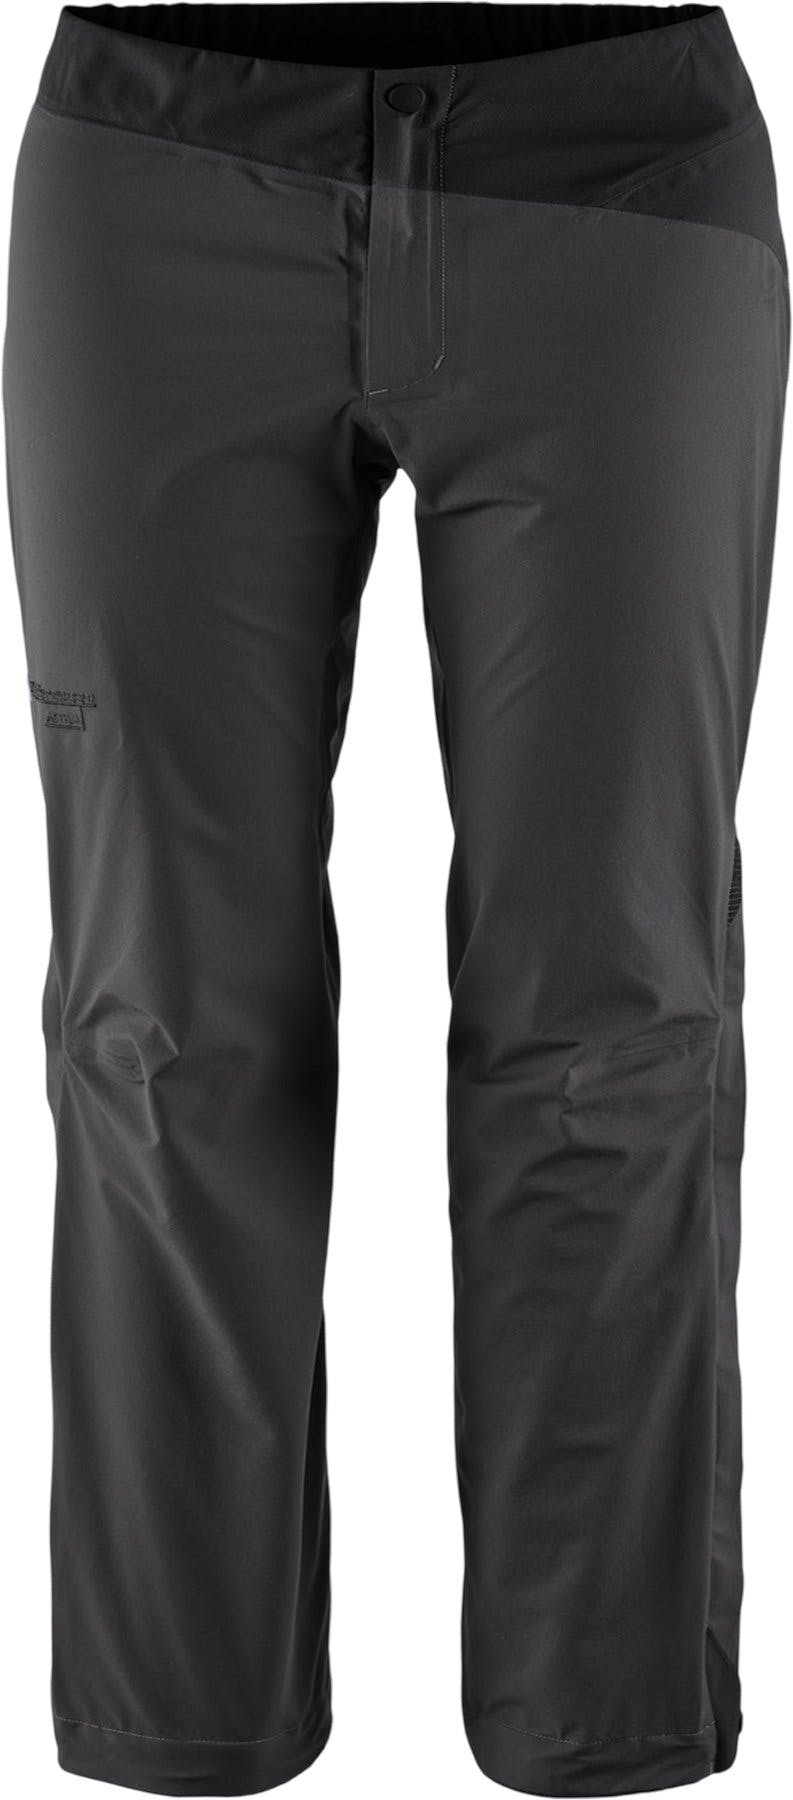 Product image for Asynja Lightweight Pants - Women's